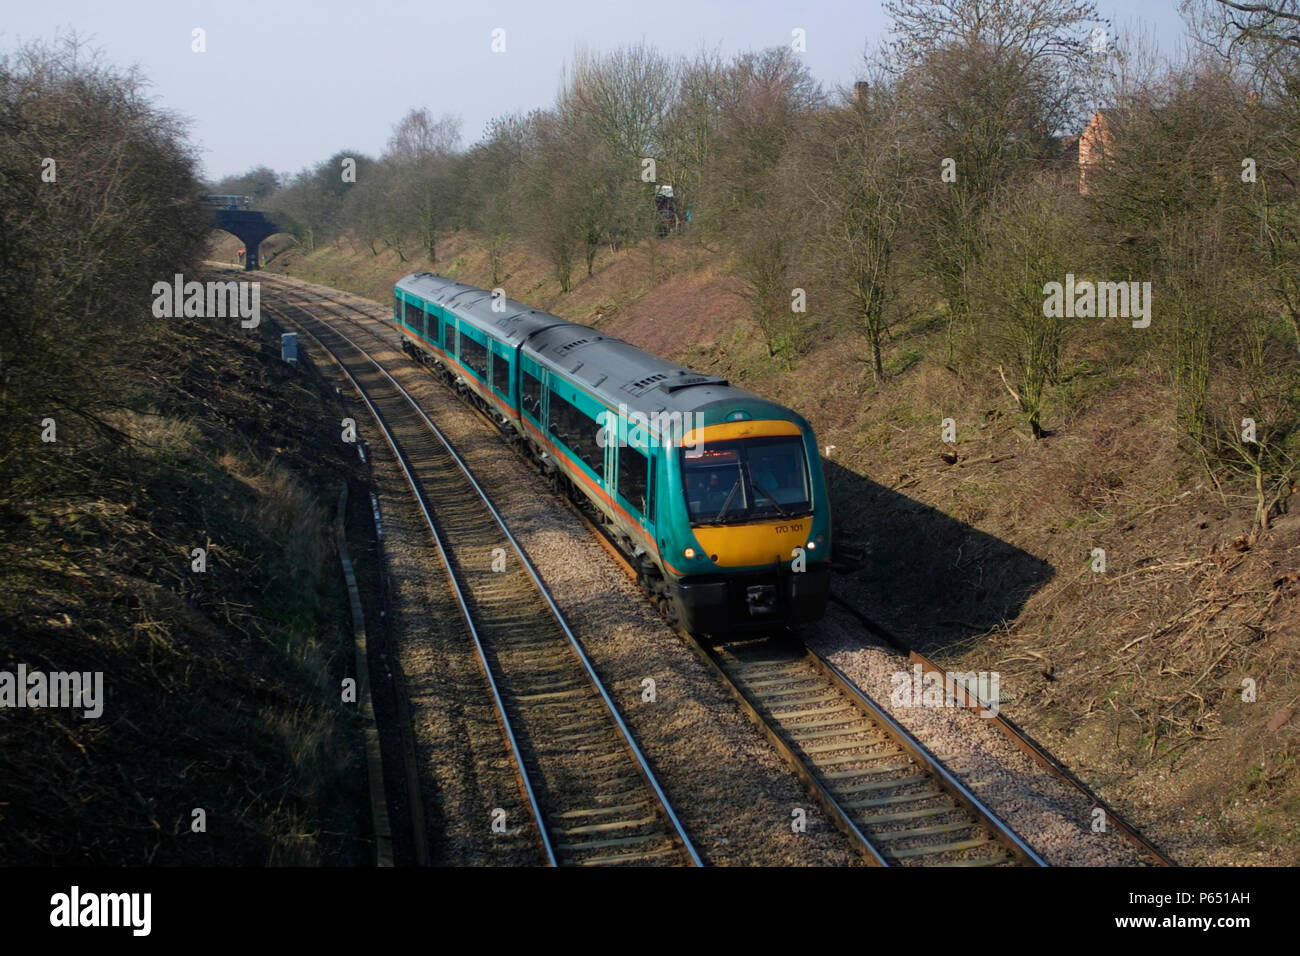 A Midland Mainline class 170 Turbostar train passes through the cutting at Newton Harcourt as it heads for London St Pancras station. April 2004. Stock Photo